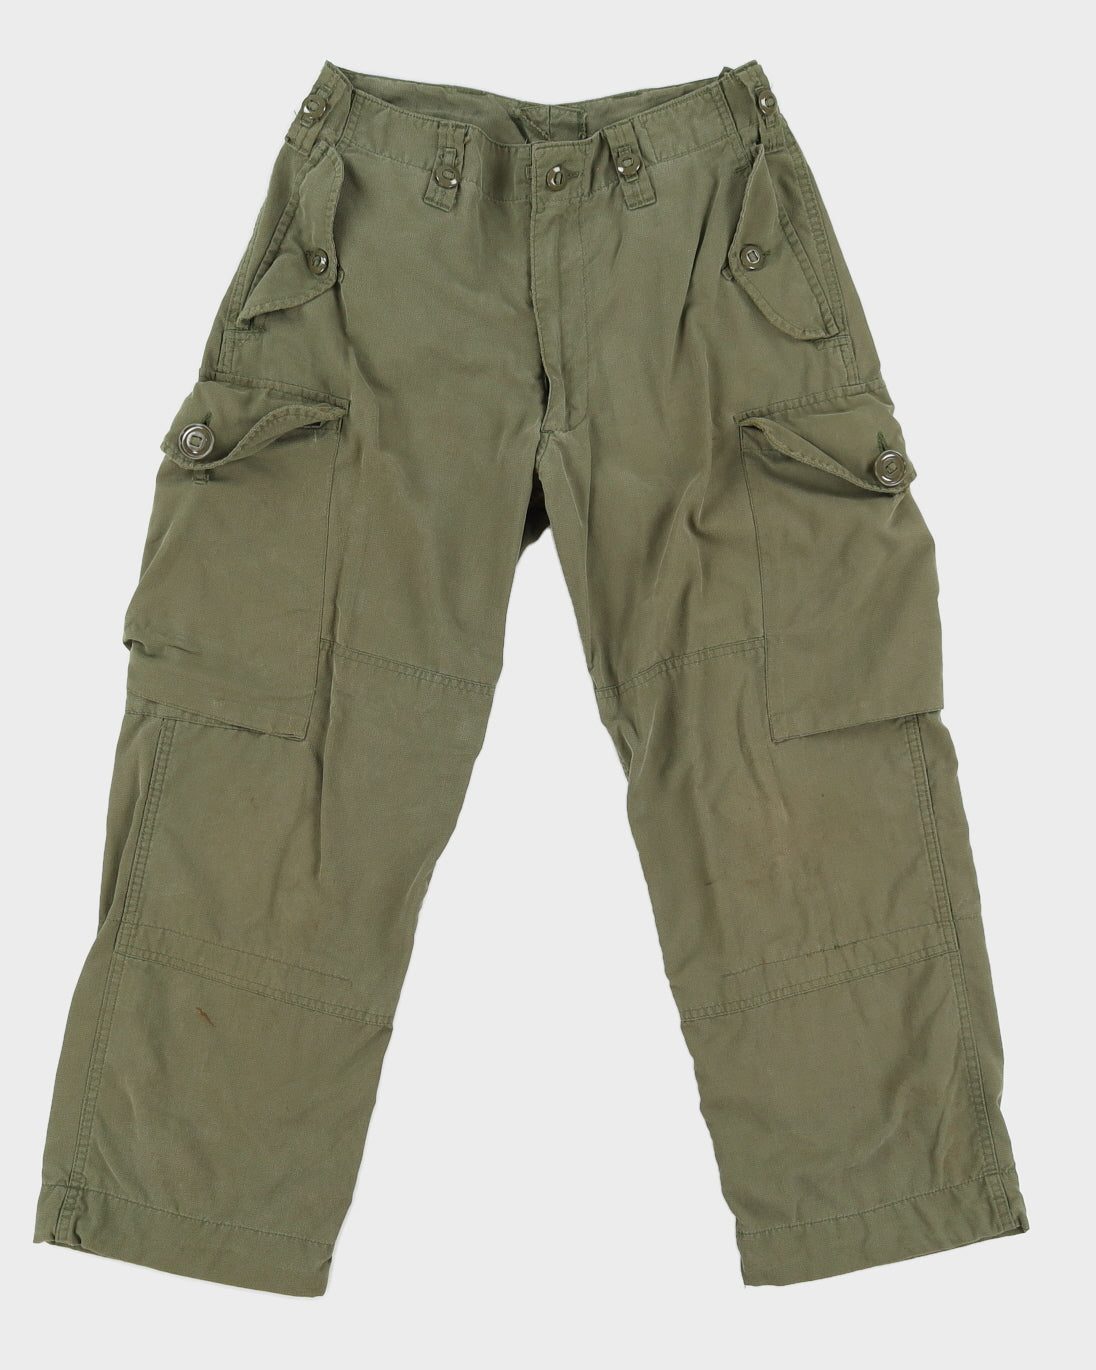 80s Canadian Army Lightweight Combat Trousers - 30x26